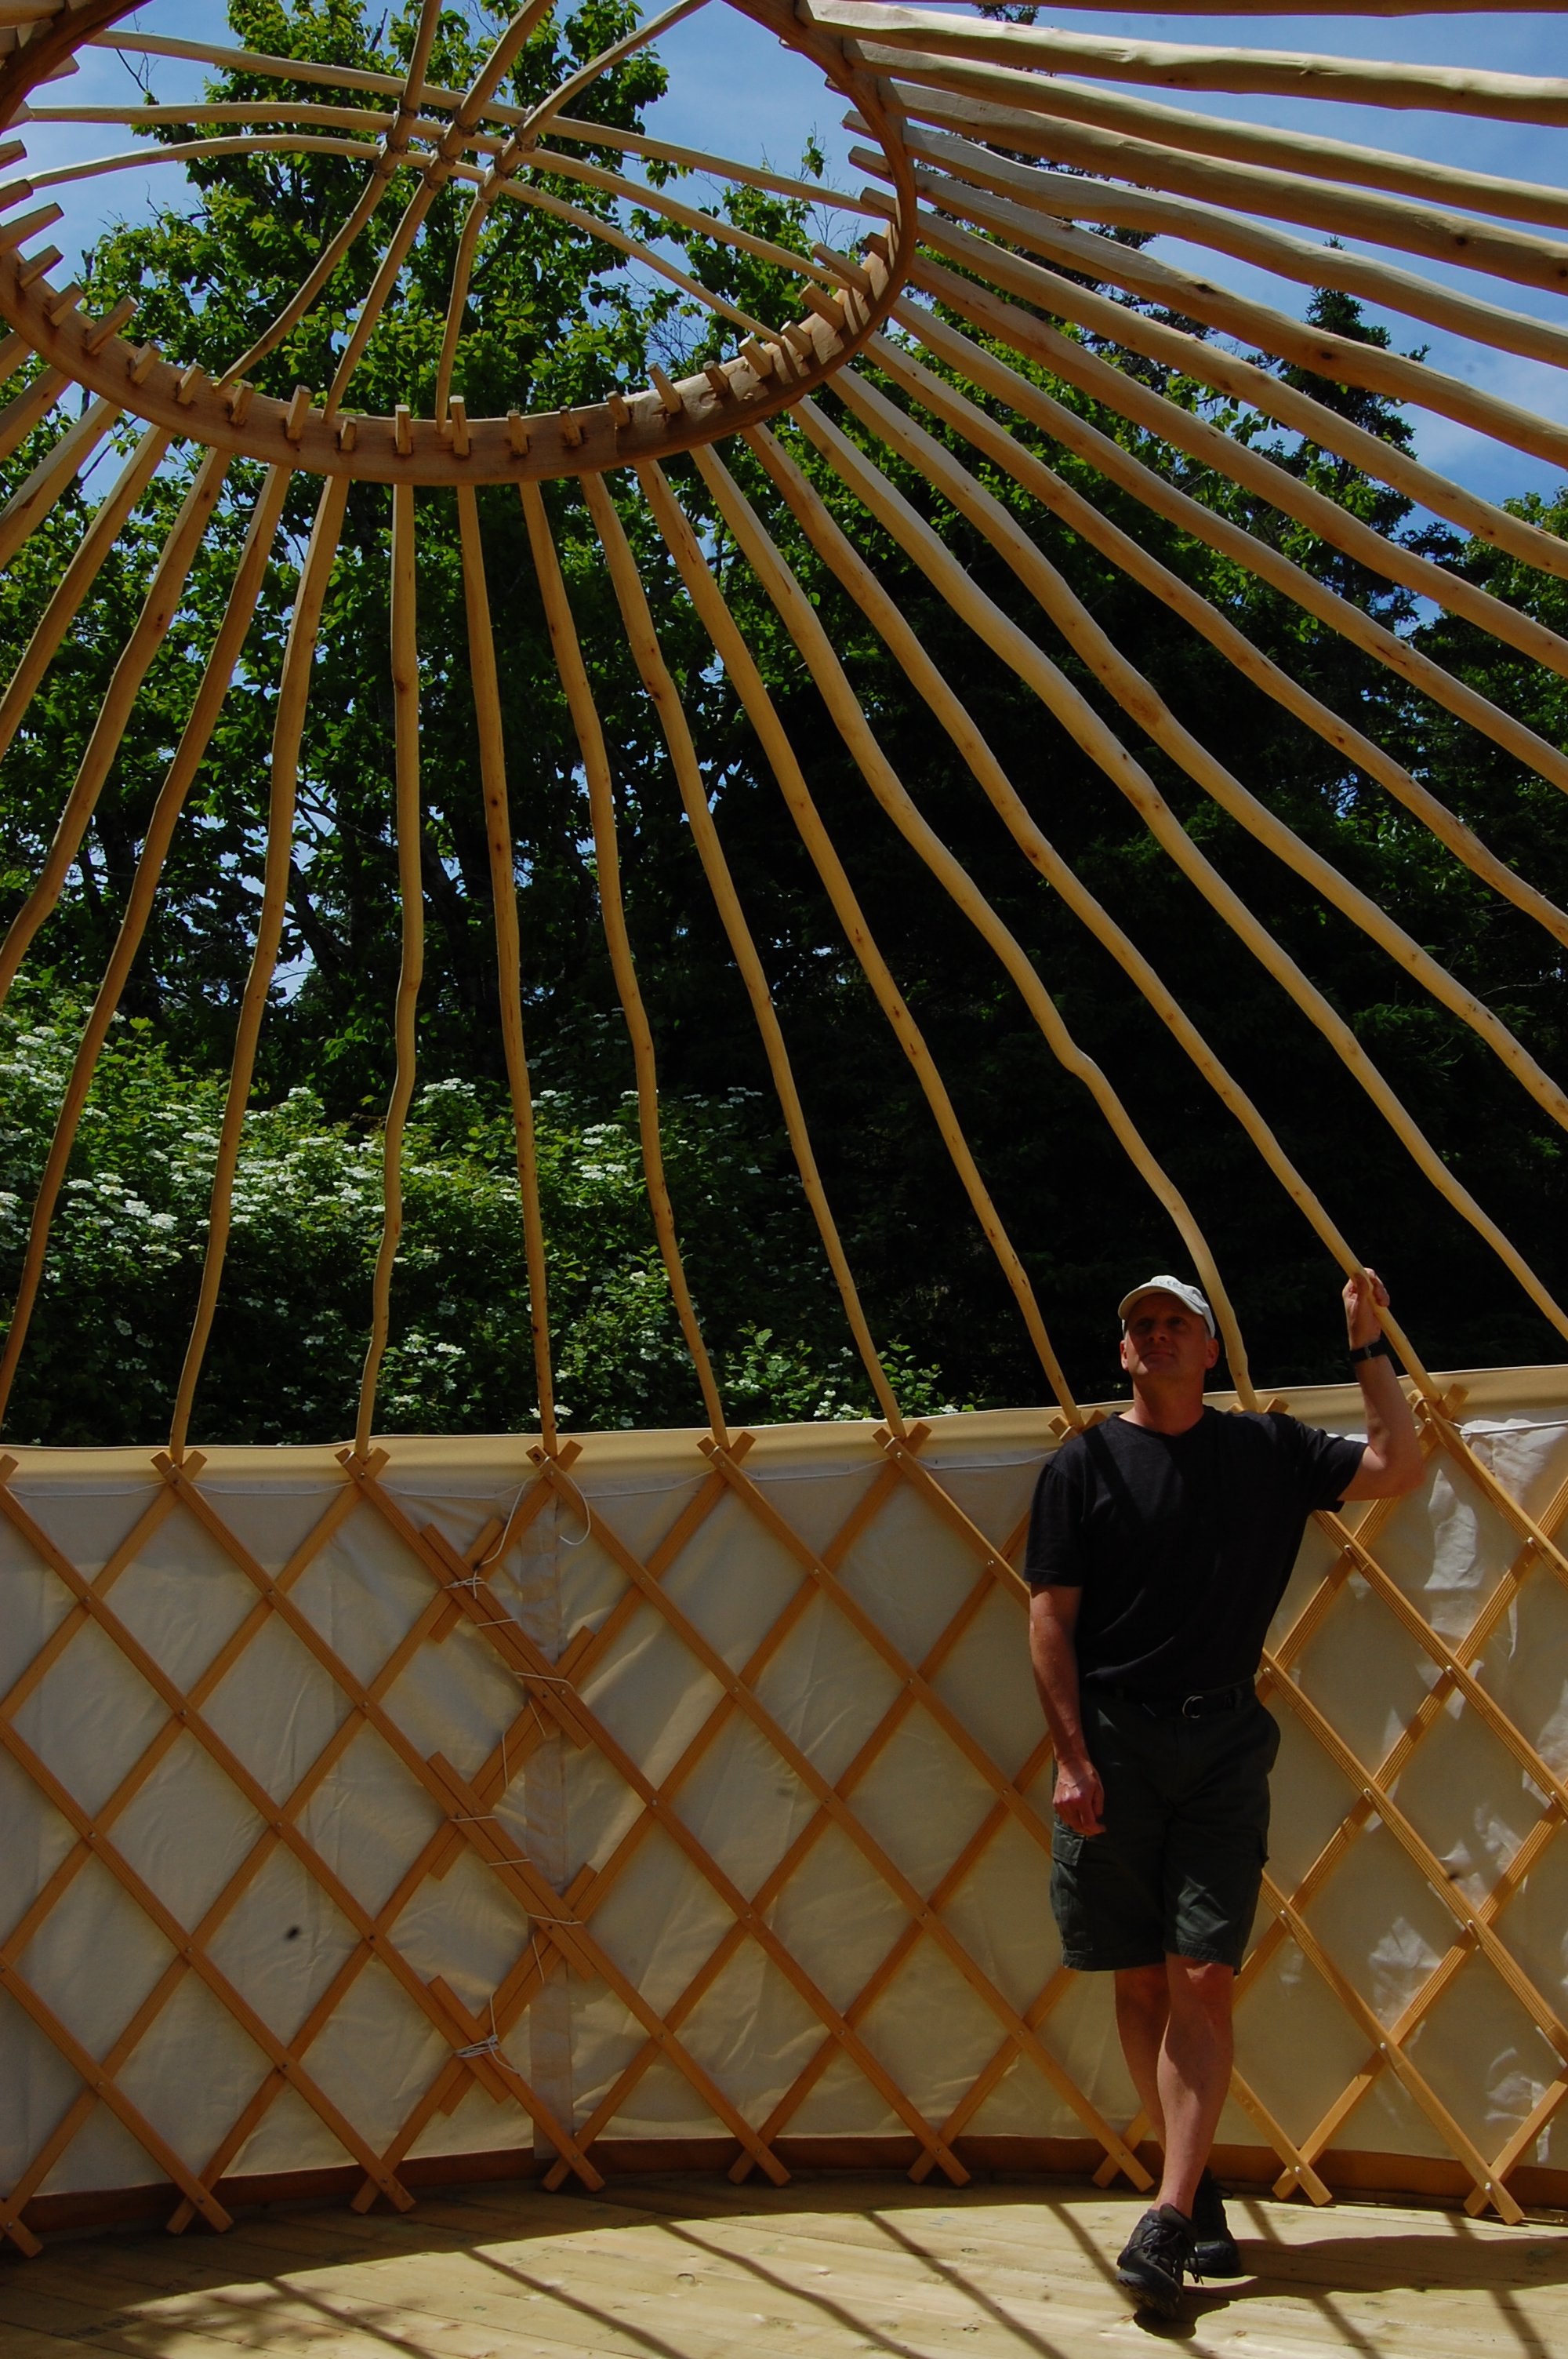 Our yurts feature the ancient design with one third more roof poles than modern alternatives.